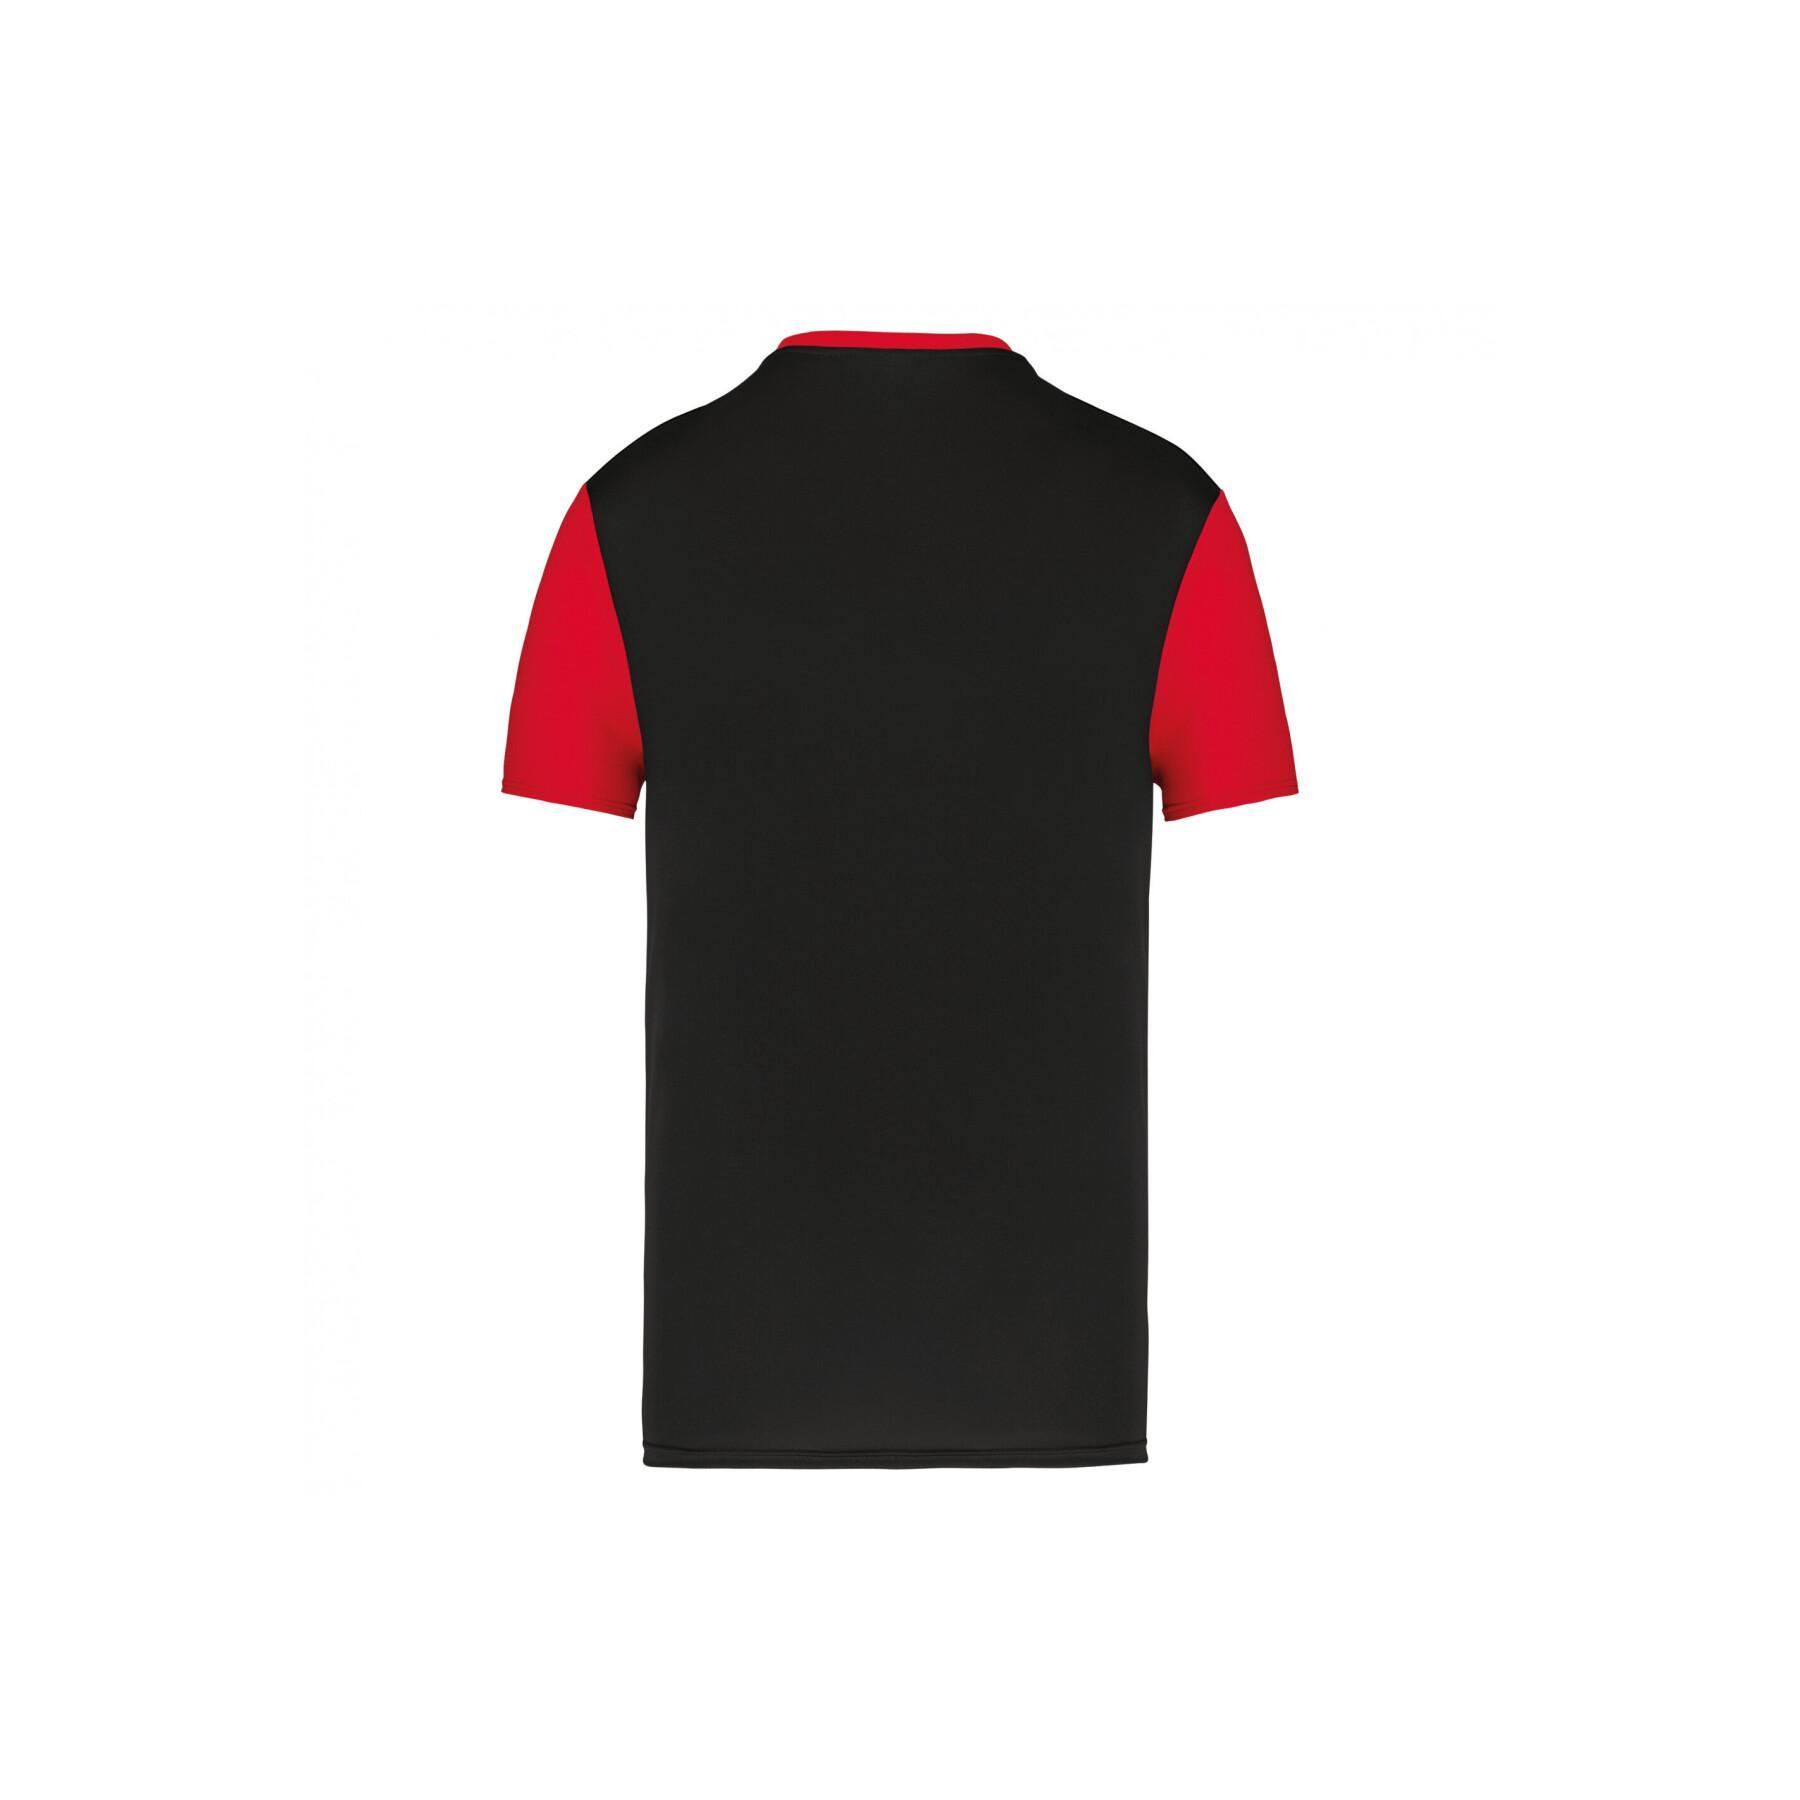 Two-tone jersey for children Proact